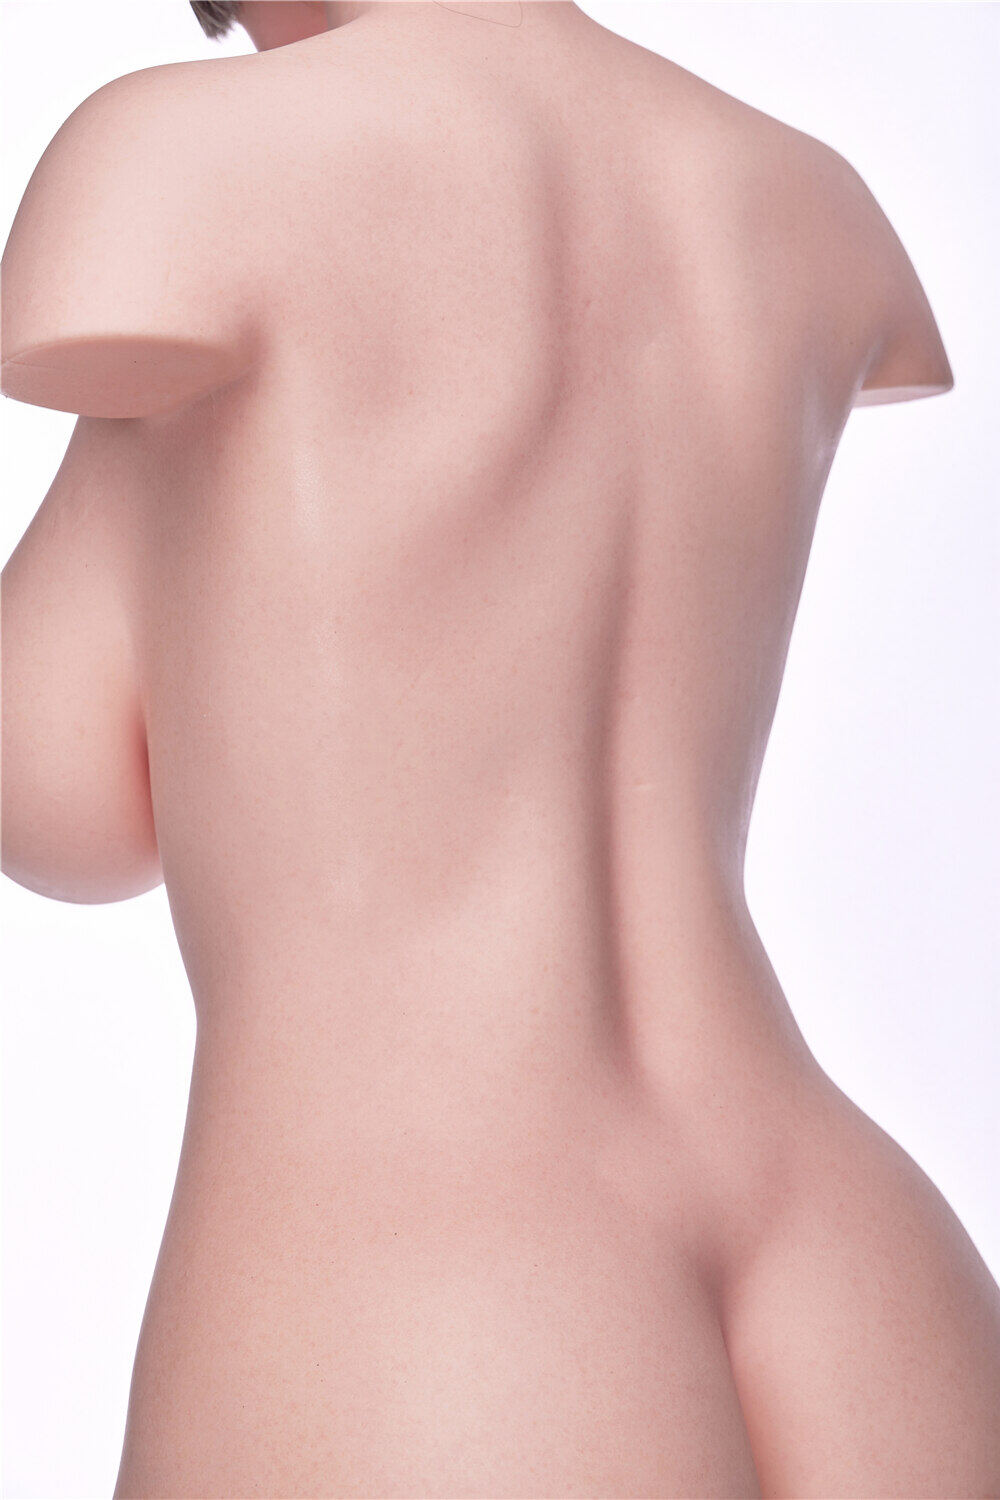 Chelsie Nice Cheap New Silicone Irontech Sex Doll image10